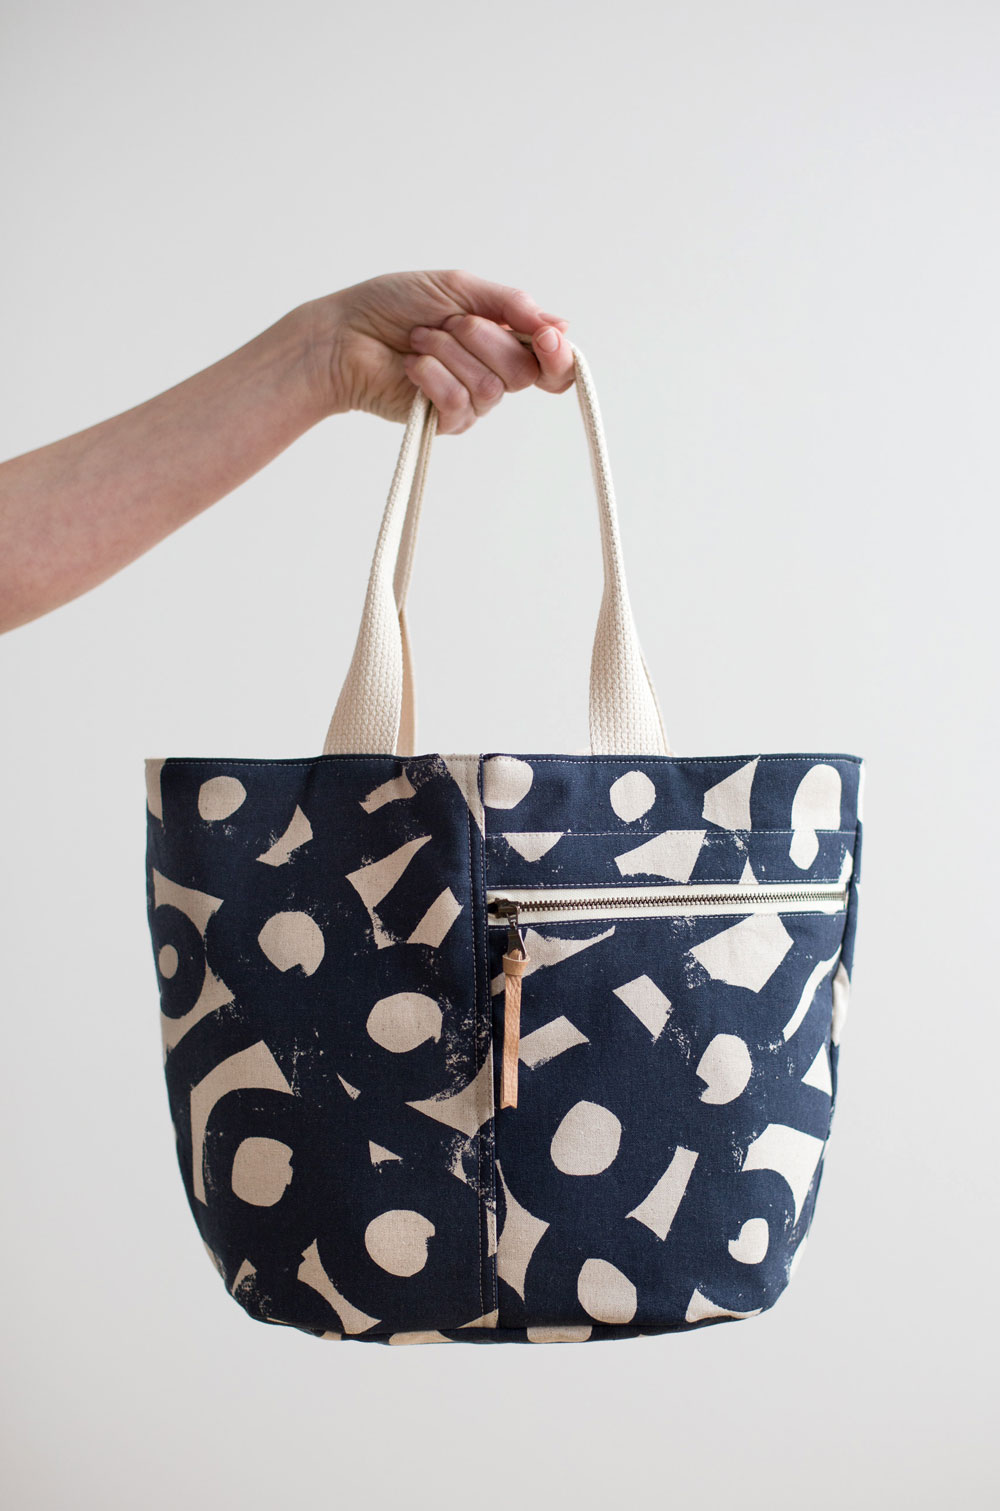 Meet the Maker blog series: Anna Gaham of Noodlehead creates simple, elegant, easy to follow bag patterns. Follow this blog series to learn about more pattern writers and artists in the sewing industry.